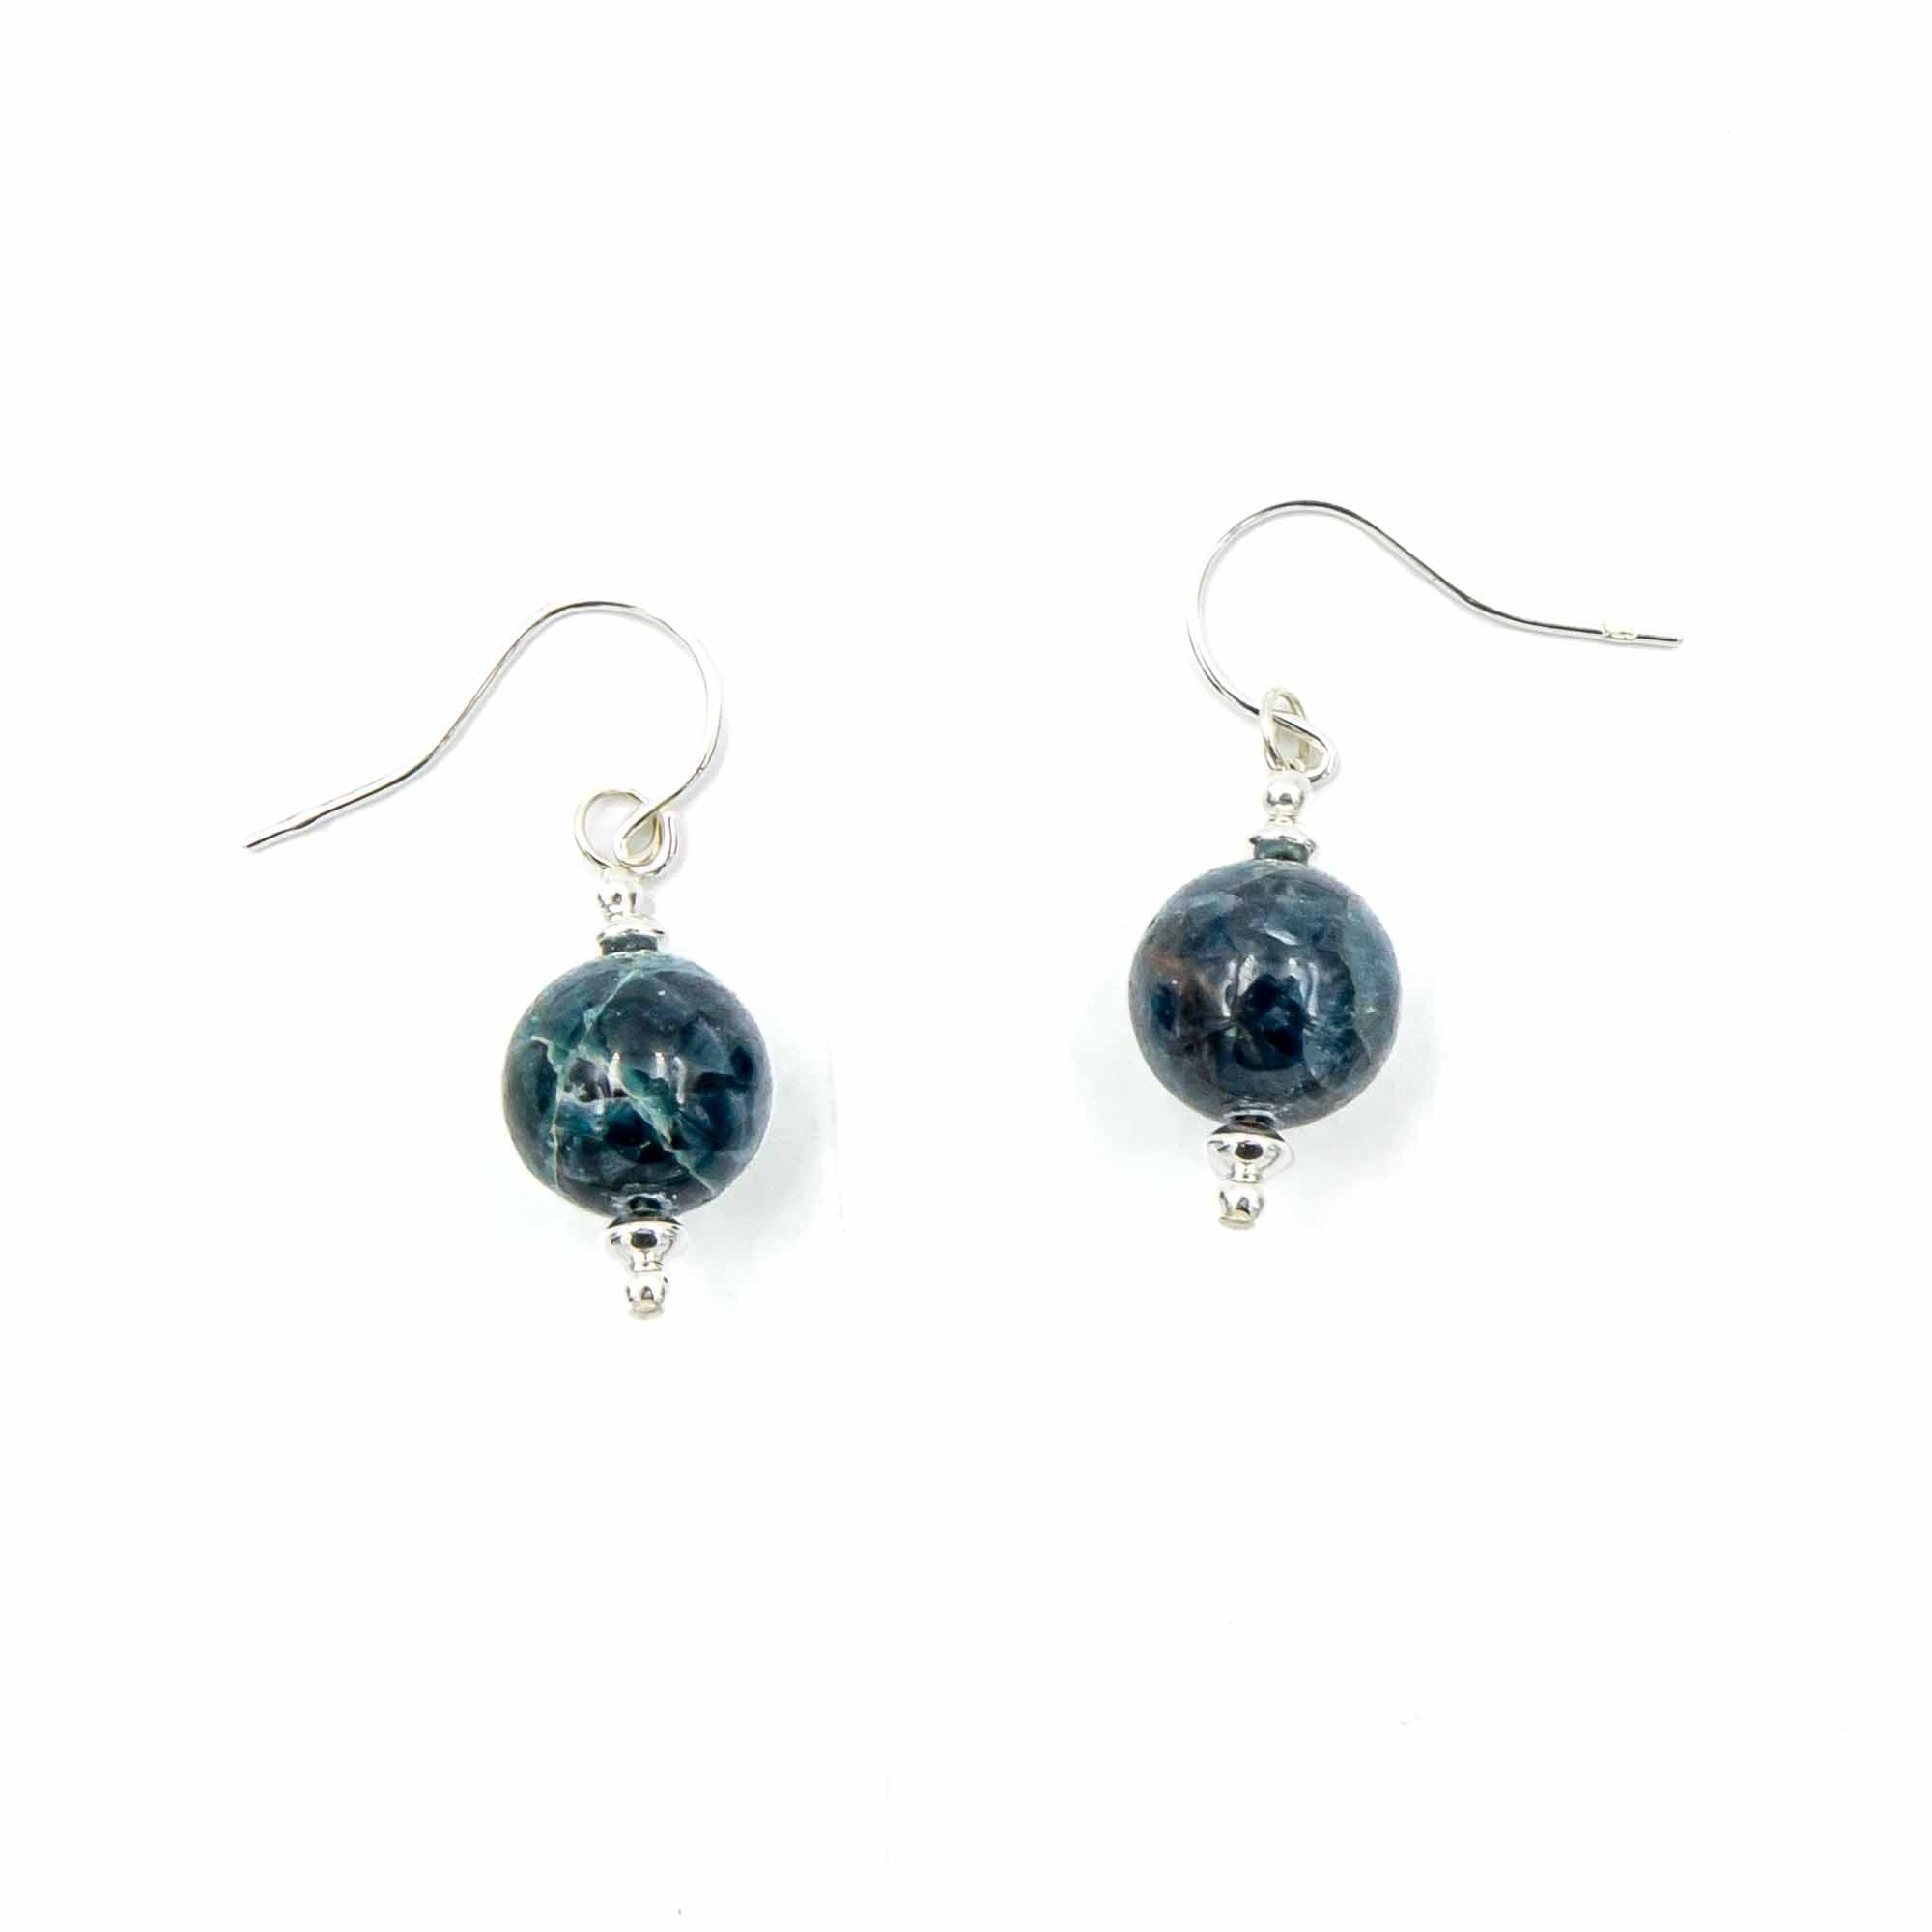 Earth Song Jewelry handmade eco-friendly Apatite Solitaires sterling silver earrings